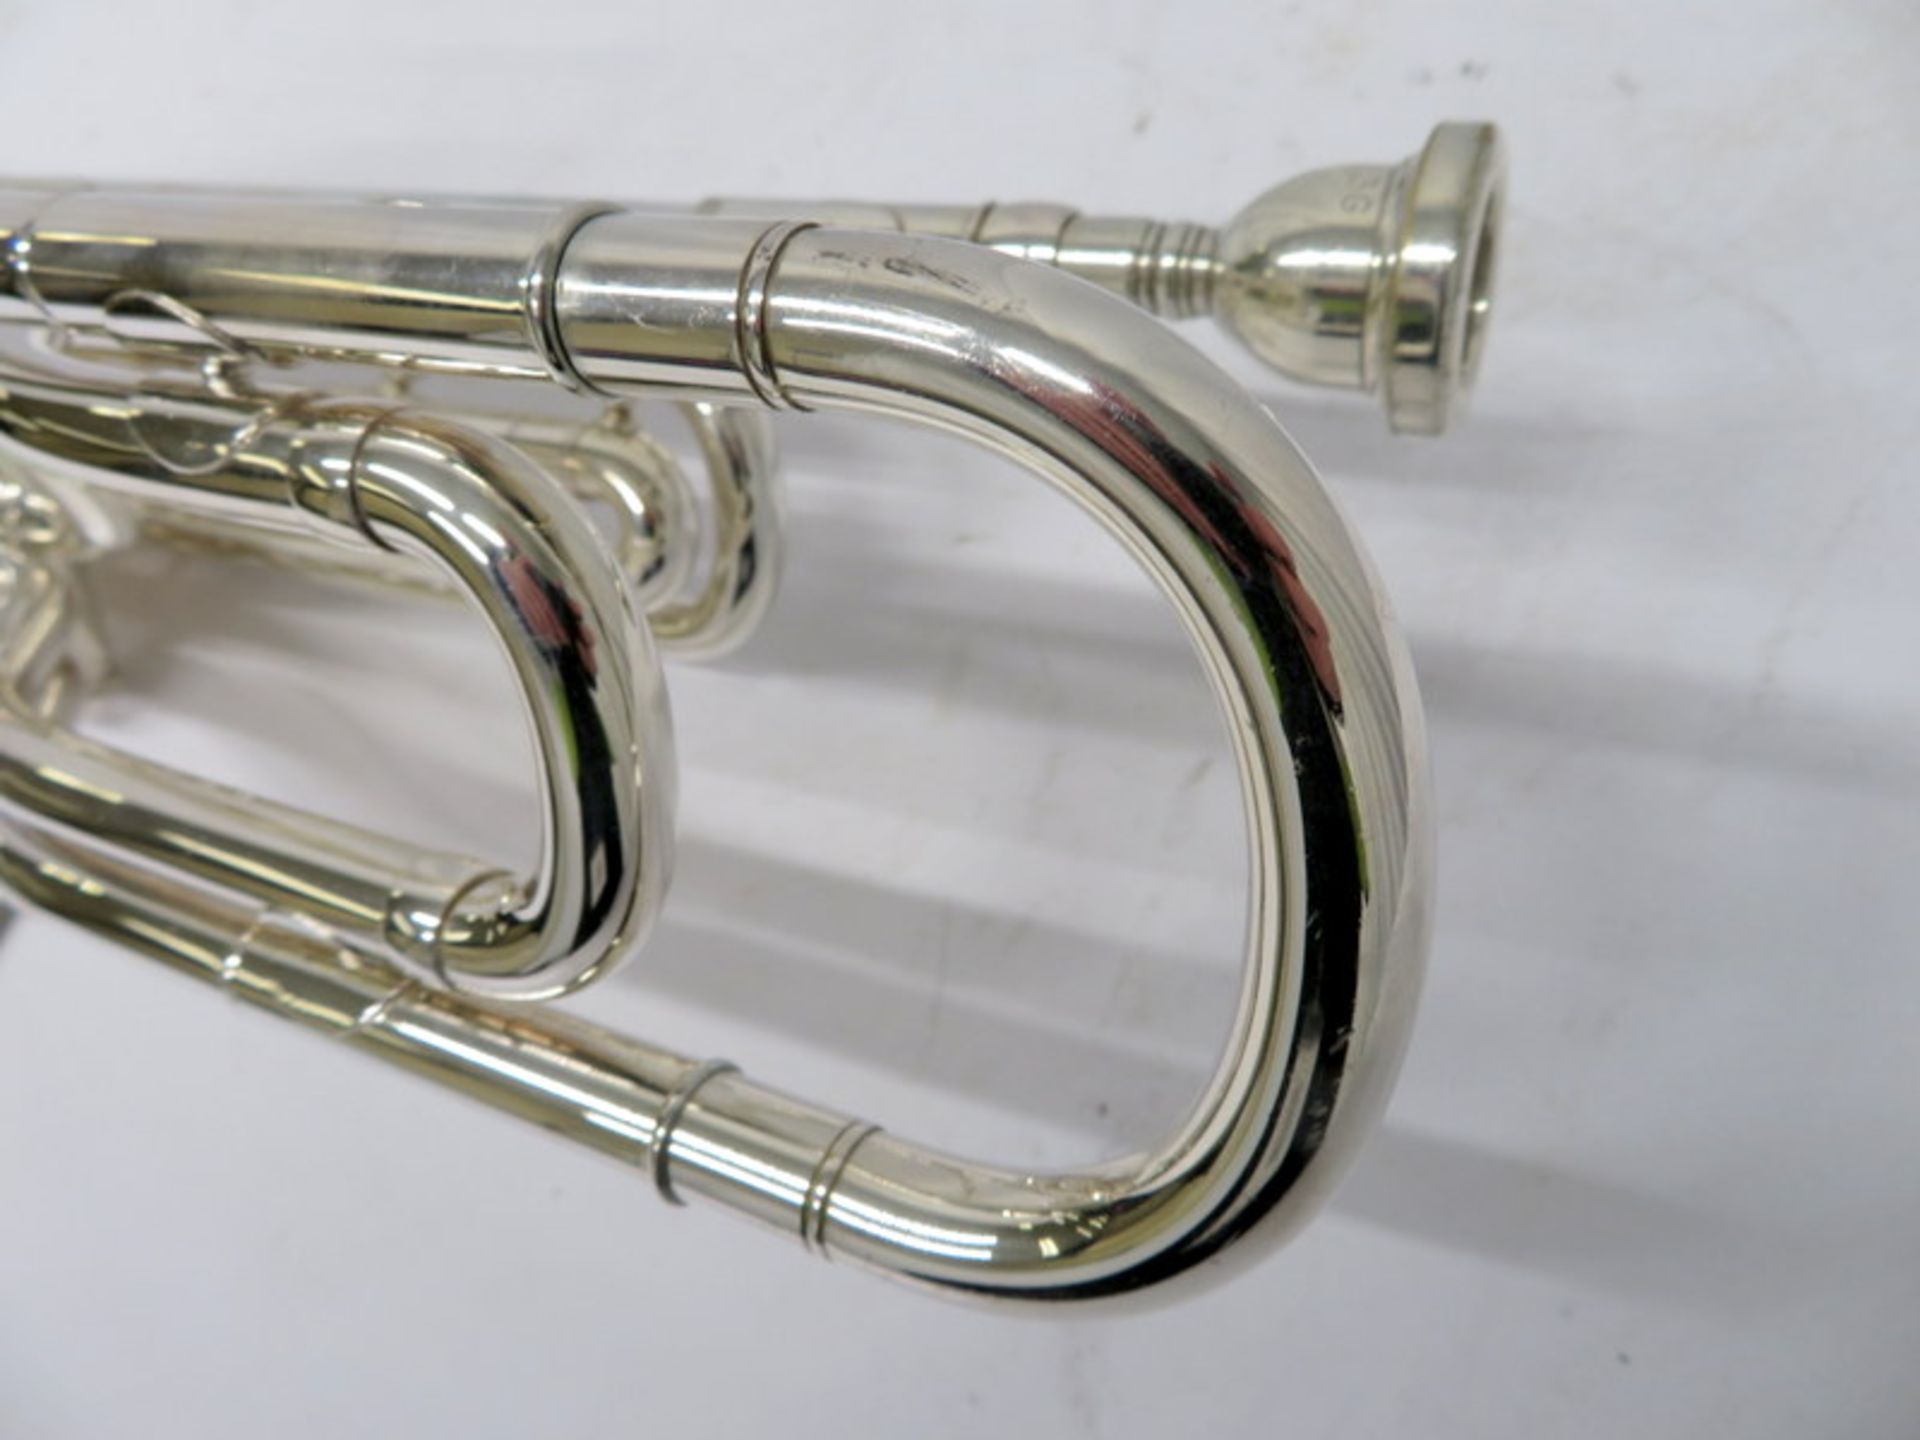 Besson International BE707 Fanfare Trumpet With Case. Serial Number: 867451. Please Note T - Image 10 of 17